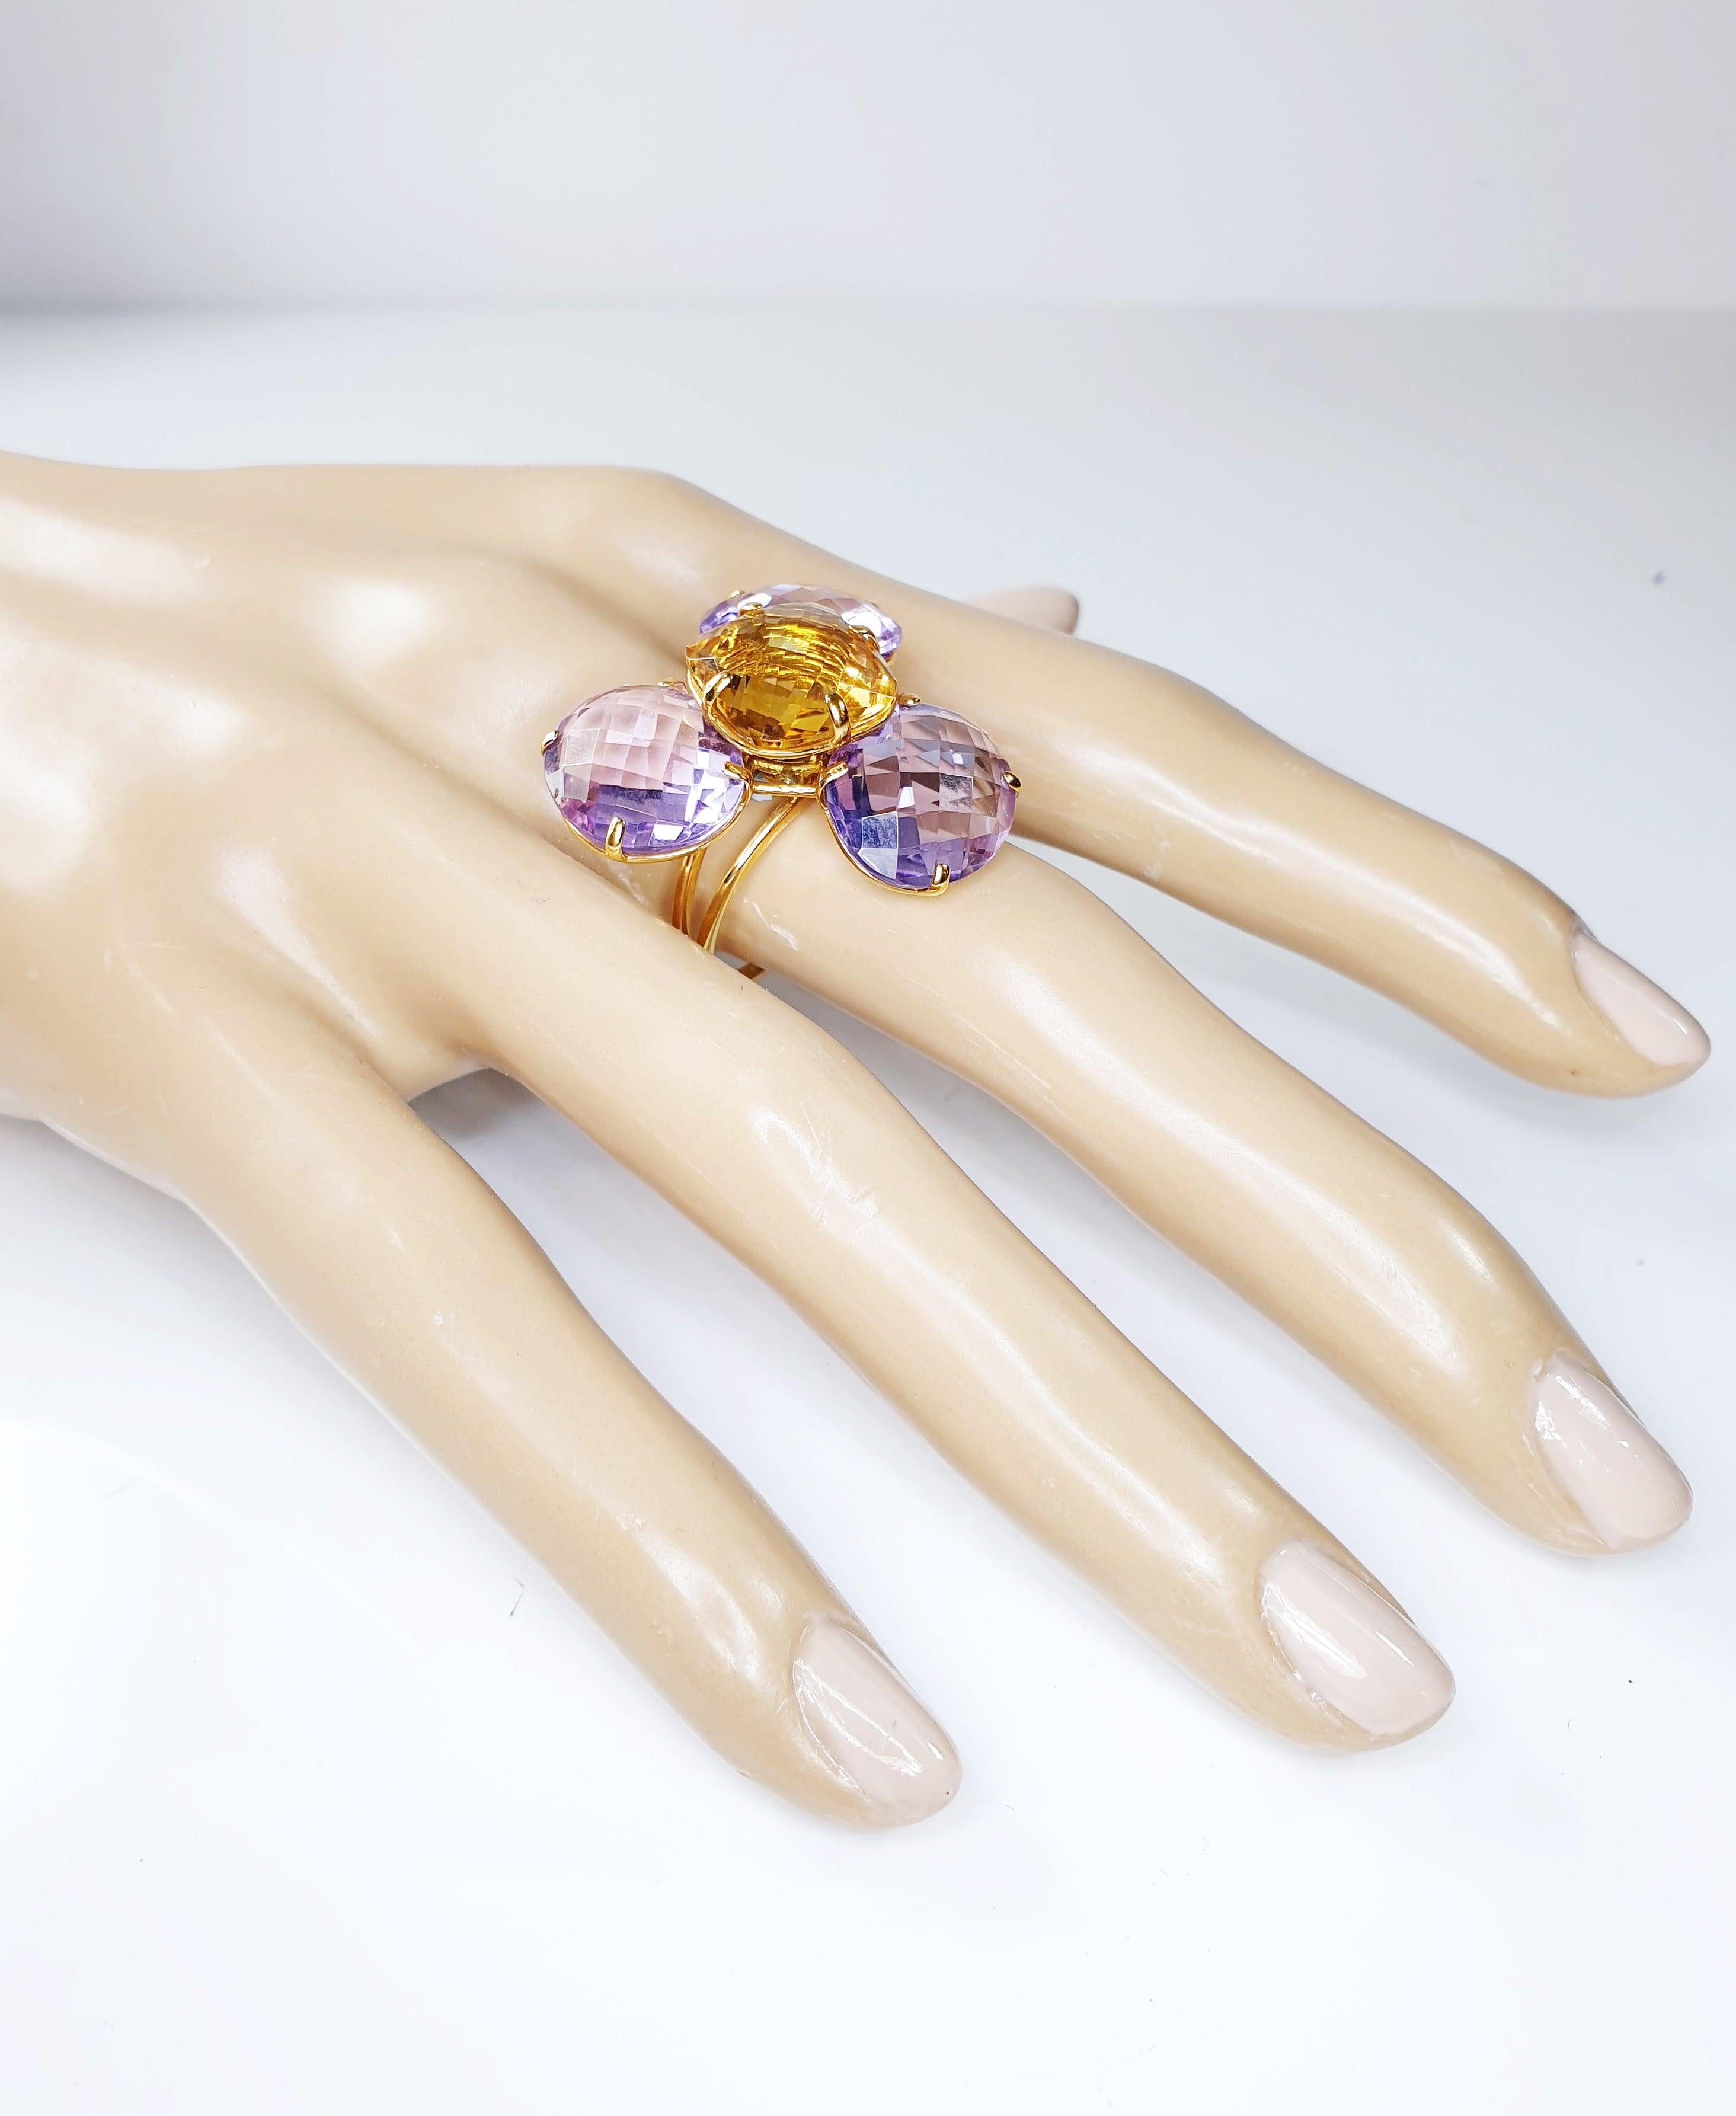 Multiphaceted Flower Ring with Central Citrine and Three Amethysts 9